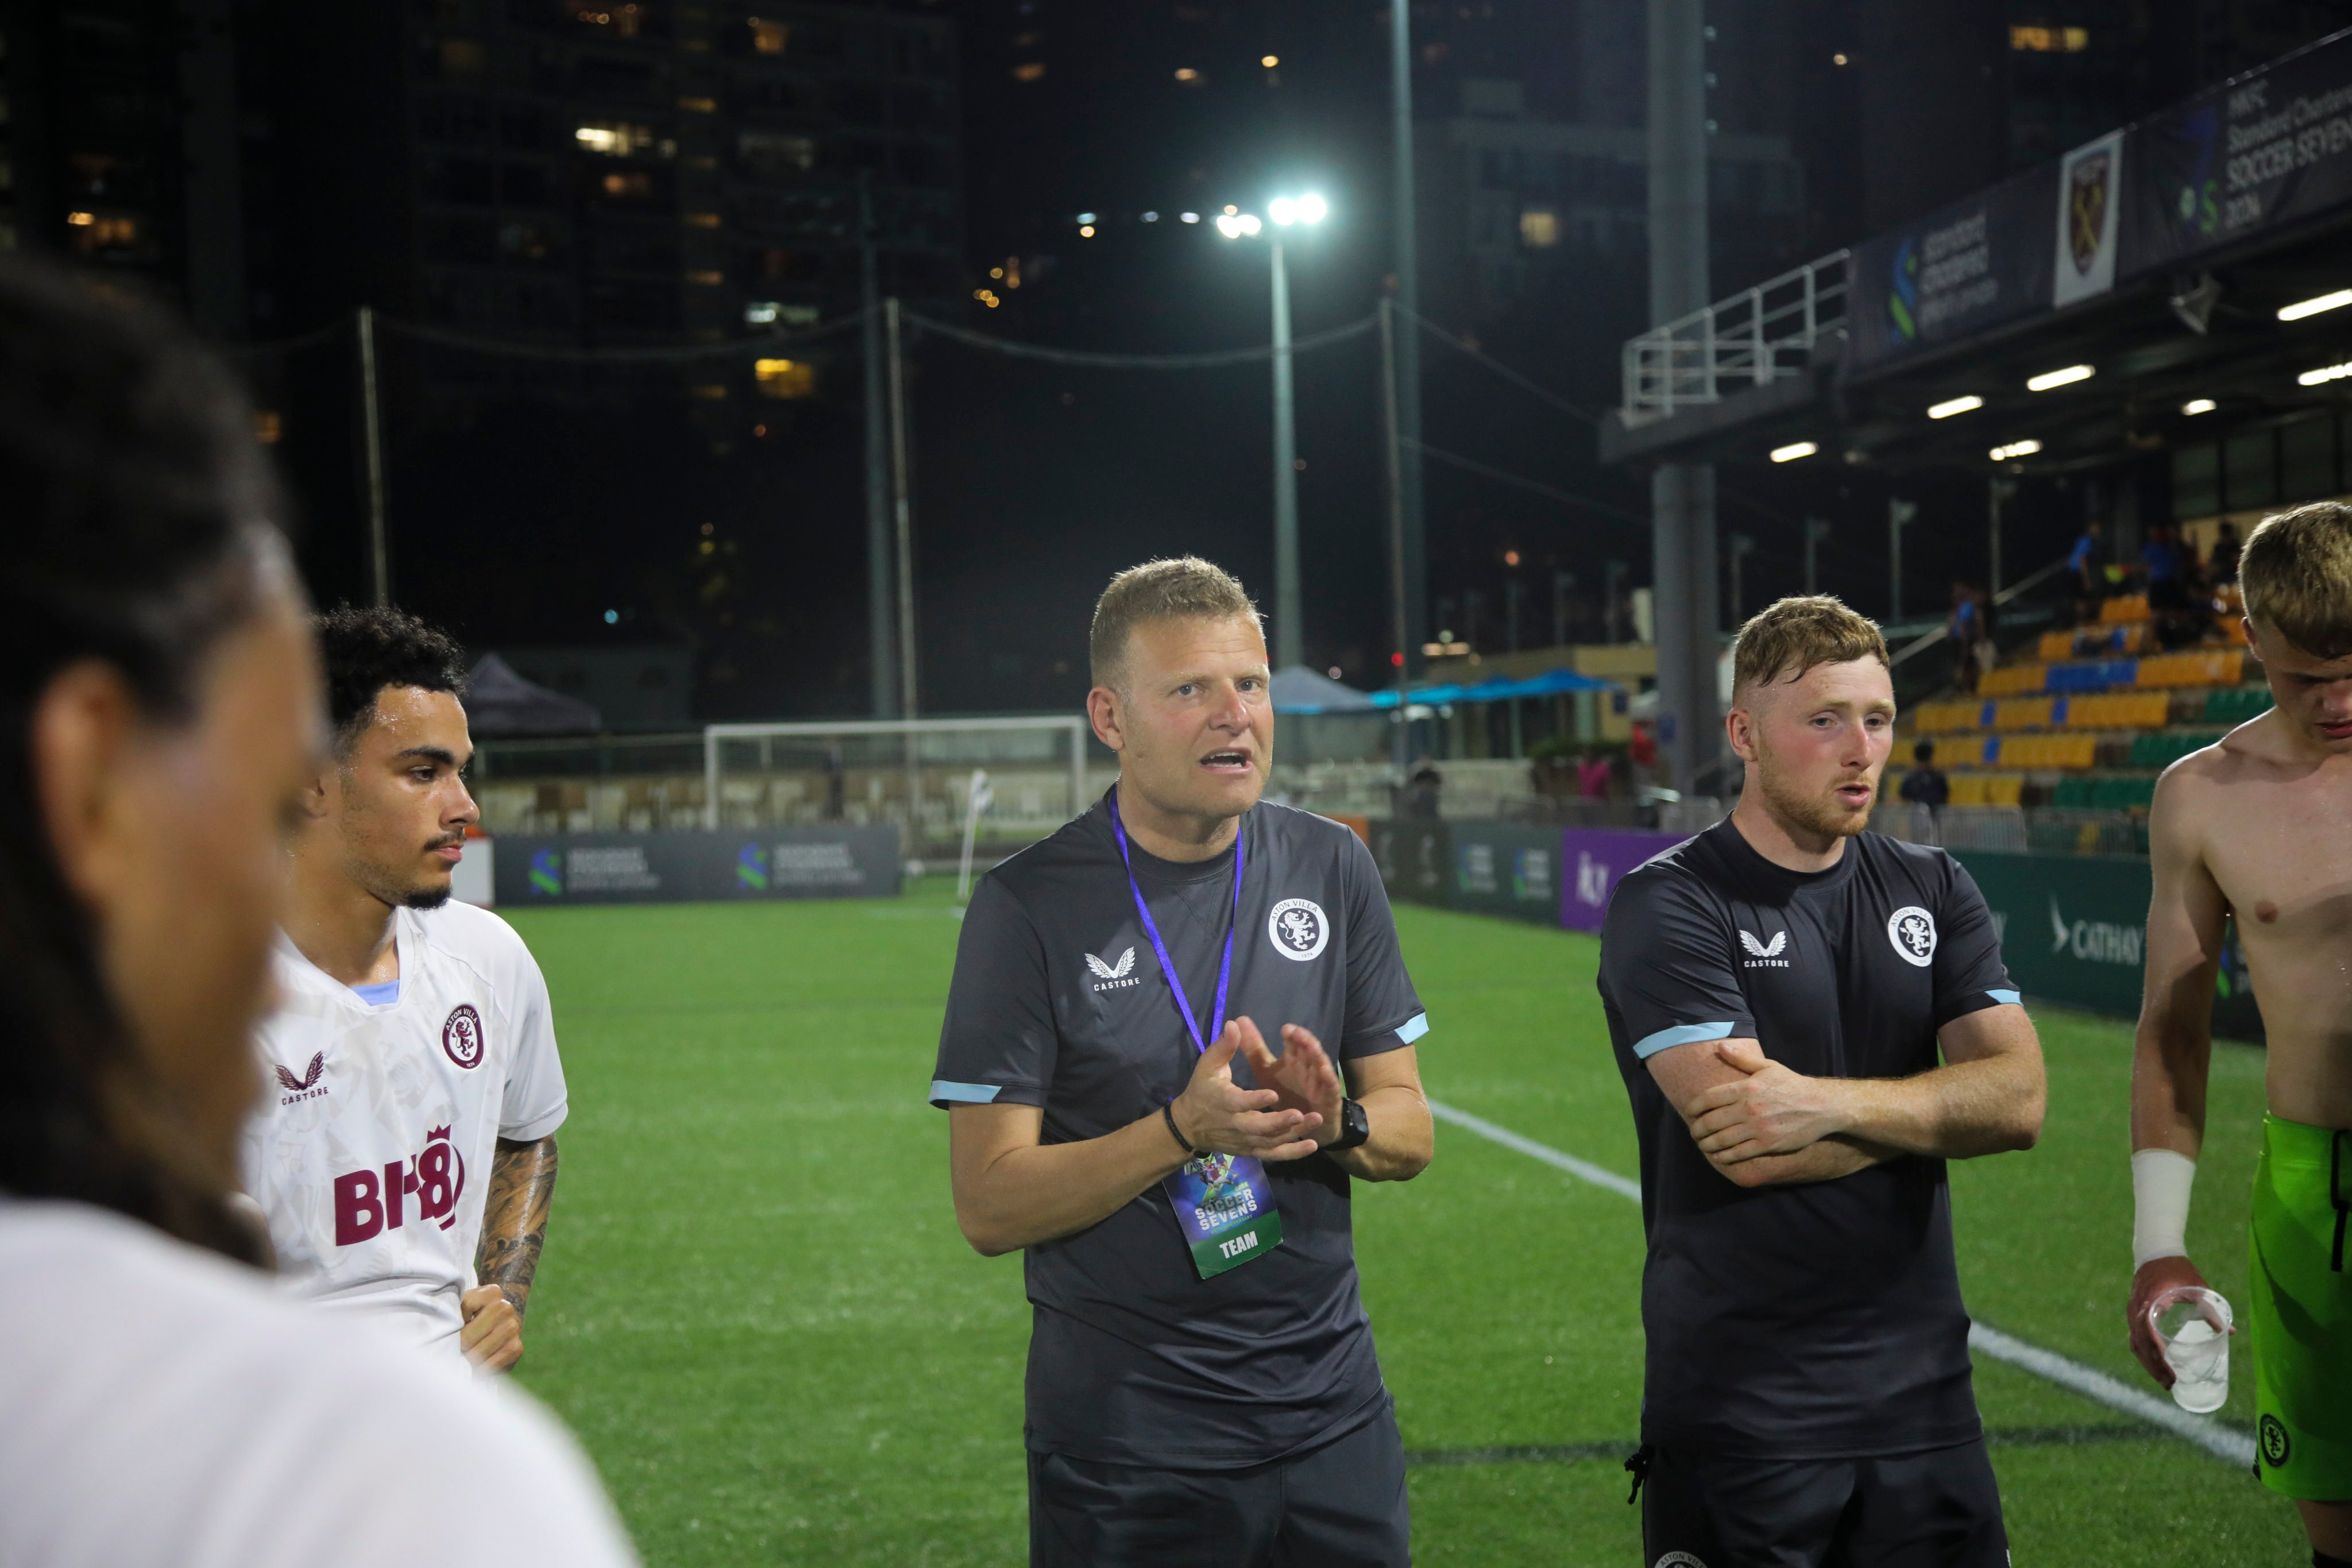 Aston Villa under-21s coach Josep Gombau chats to his players during the HKFC Soccer Sevens. Photo: HKFC Soccer Sevens